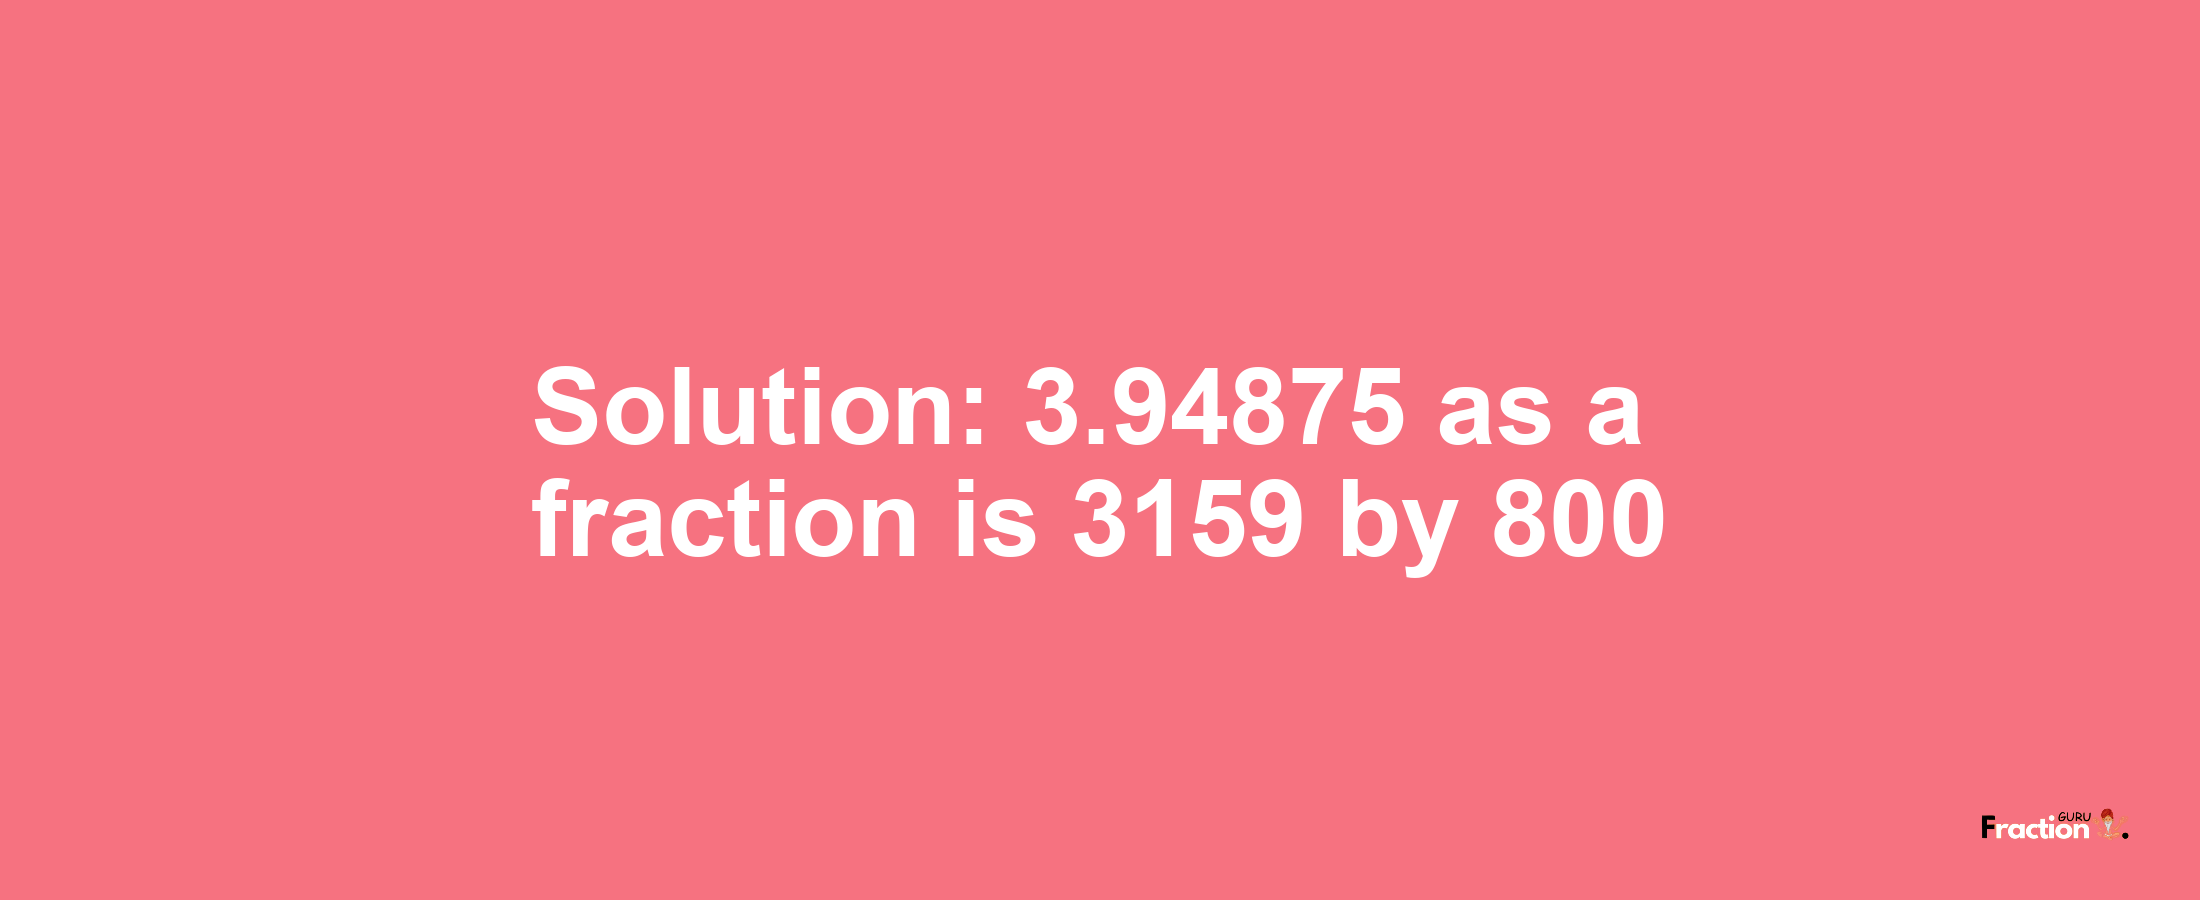 Solution:3.94875 as a fraction is 3159/800